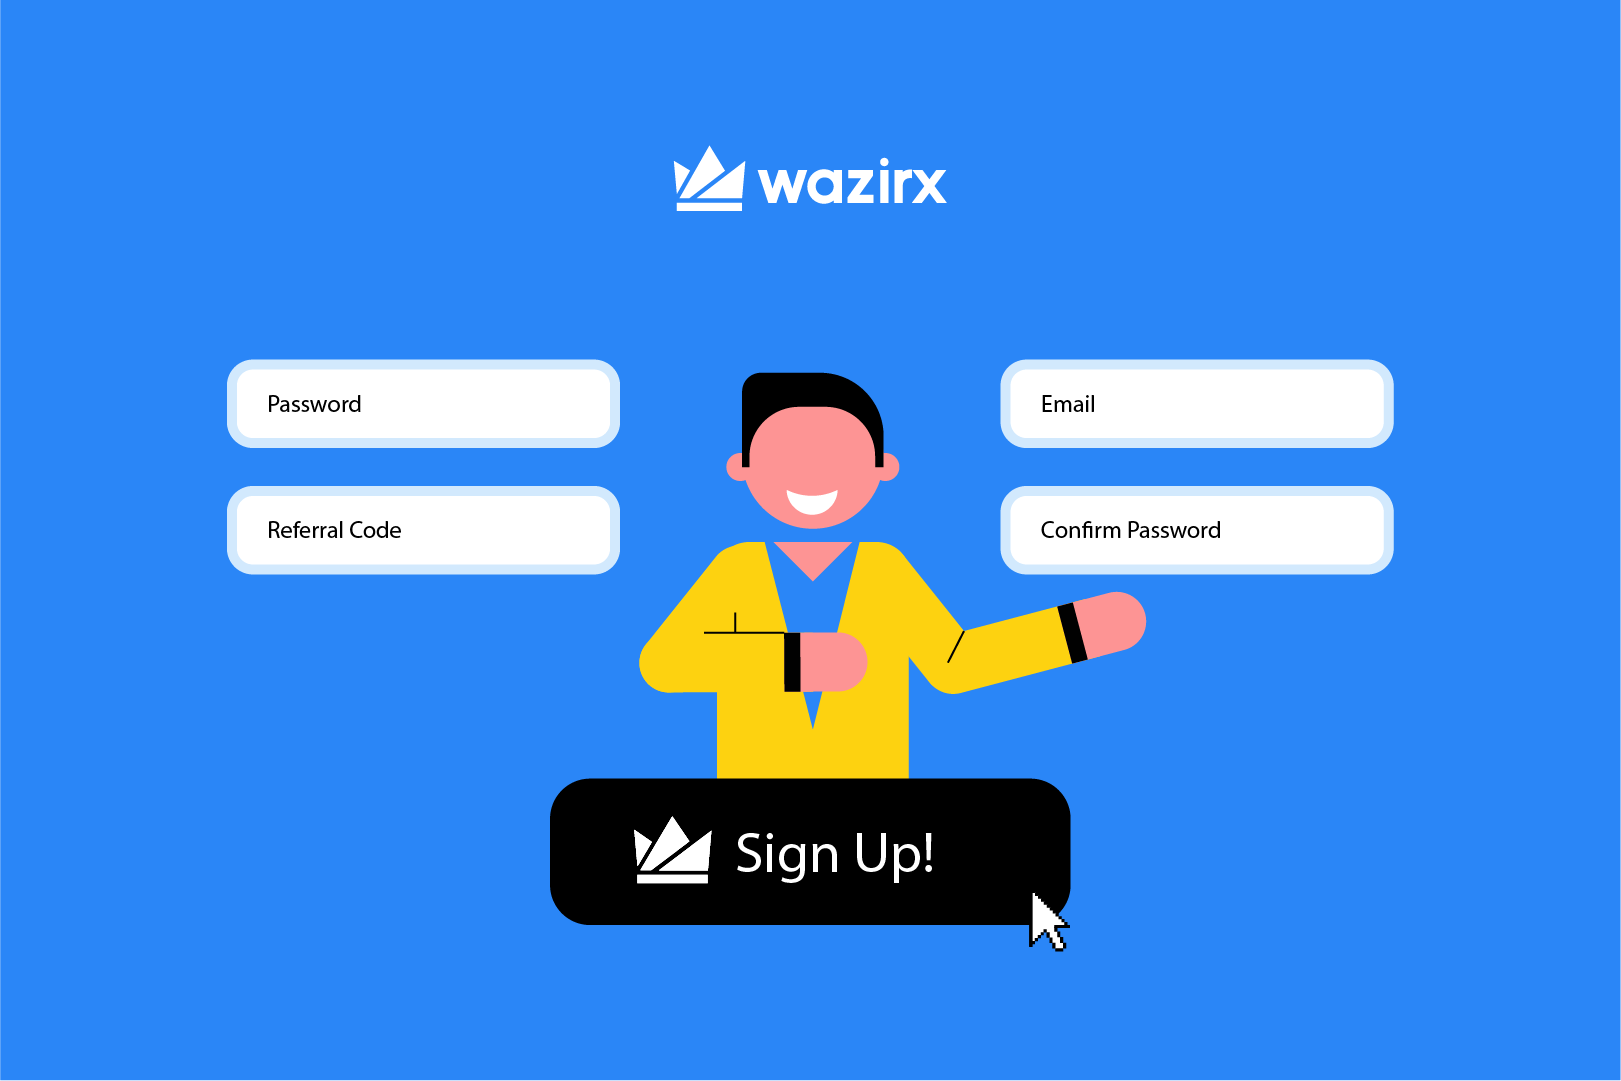 How to open an account on Wazirx?